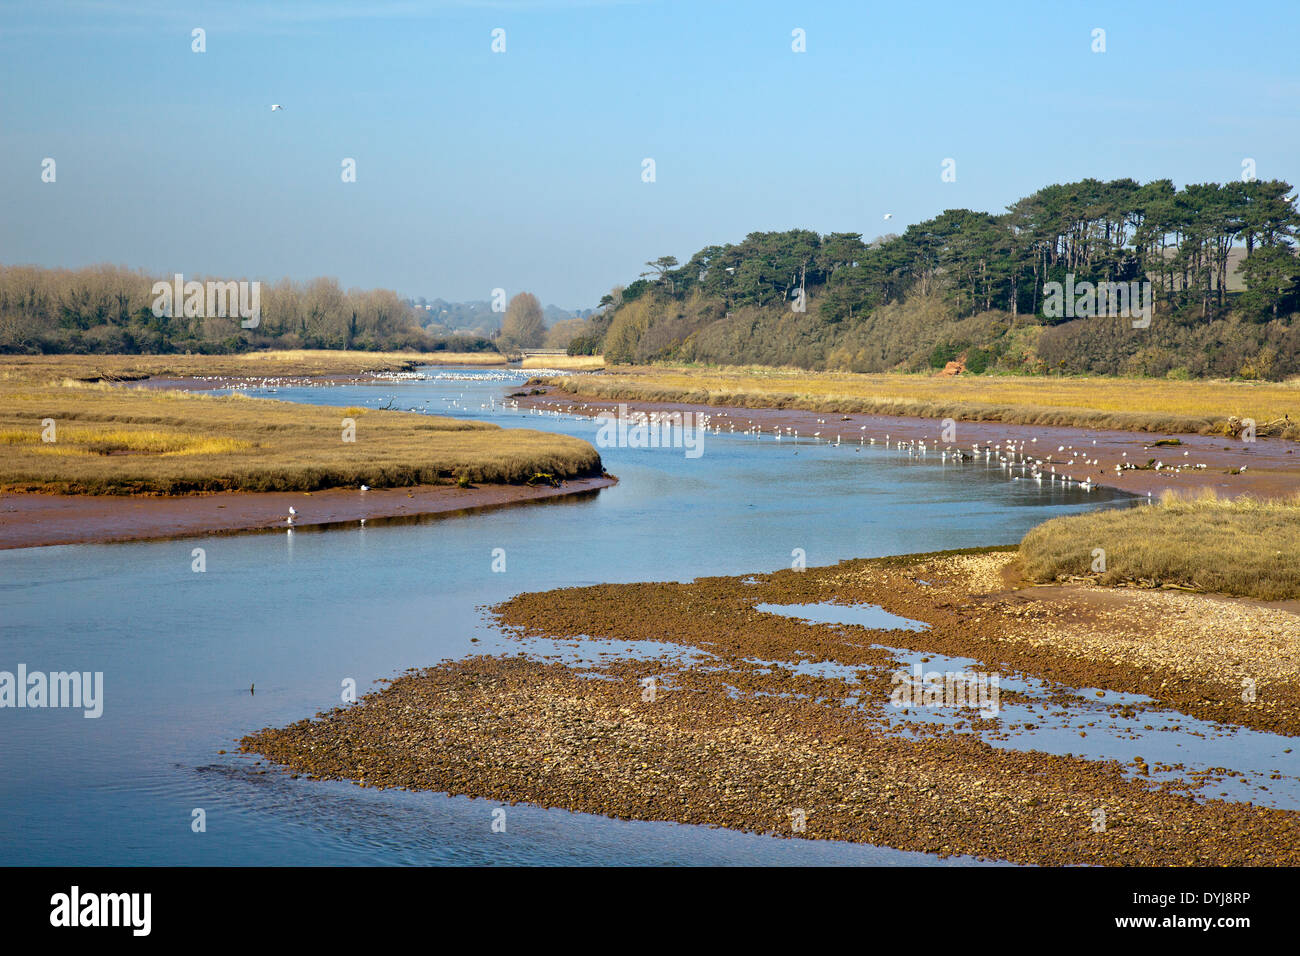 Wading birds on the banks of the River Otter and the Otter Estuary Nature Reserve at Budleigh Salterton, Devon, England, UK Stock Photo